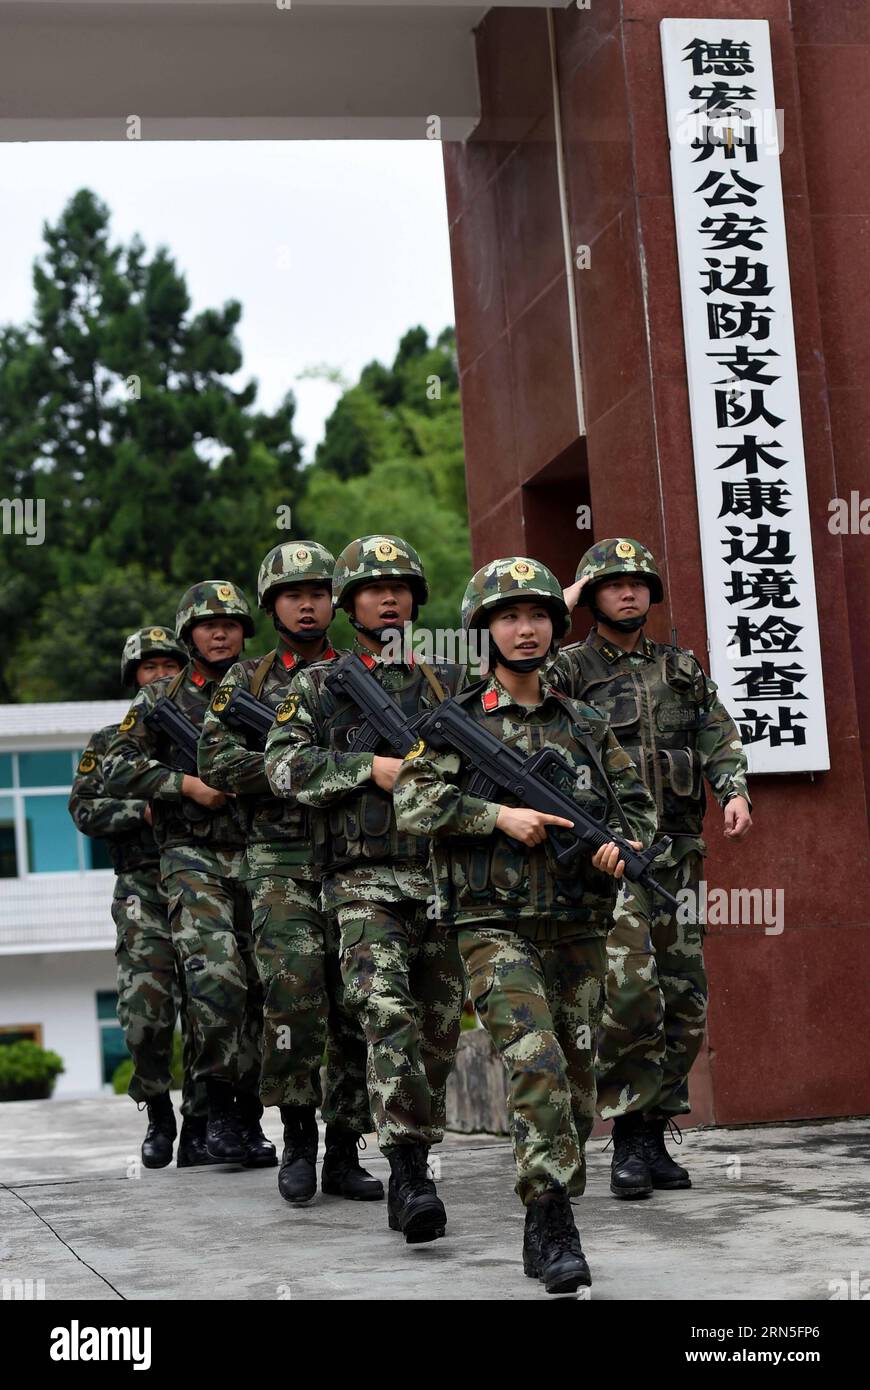 DEHONG, June 24, 2015 -- Zhang Liu (front) and her comrades walk in line at the gate of the border checkpoint of Mukang in Dehong Dai-Jingpo Autonomous Prefecture, southwest China s Yunnan Province, June 24, 2015. Born in 1995, Zhang Liu became an anti-drug soldier in border checkpoint of Mukang in 2013. Grown up in an affluent family in central China s Hunan Province, Zhang said that being a soldier had always been her dream, which drove her to join the army after graduating from high school. Being a front line anti-drug force, the border checkpoint of Mukang has captured about 100 kilograms Stock Photo